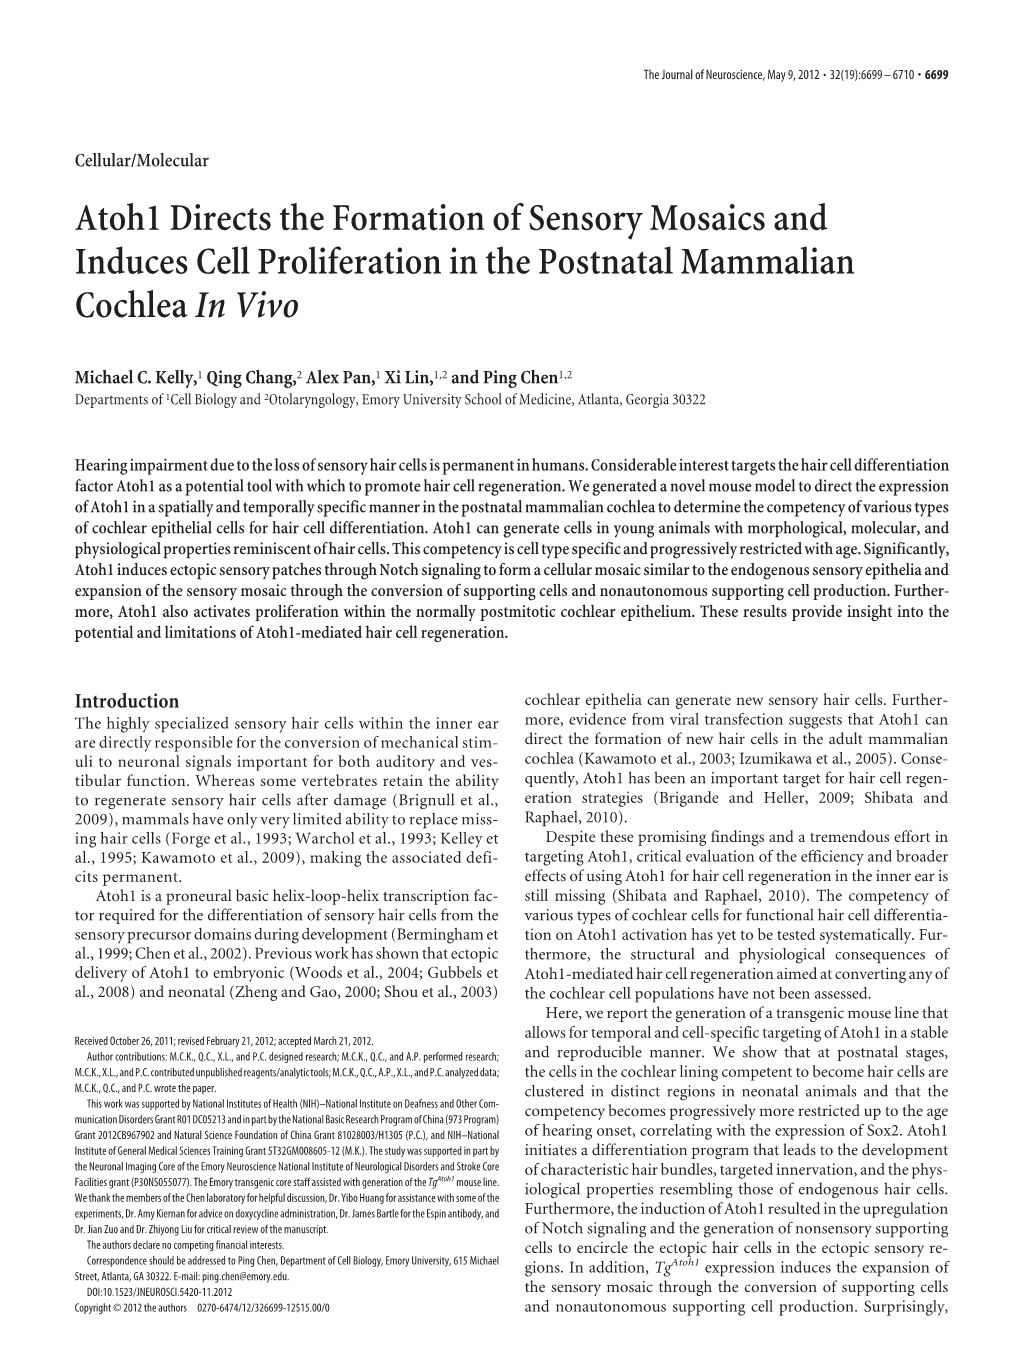 Atoh1 Directs the Formation of Sensory Mosaics and Induces Cell Proliferation in the Postnatal Mammalian Cochlea in Vivo